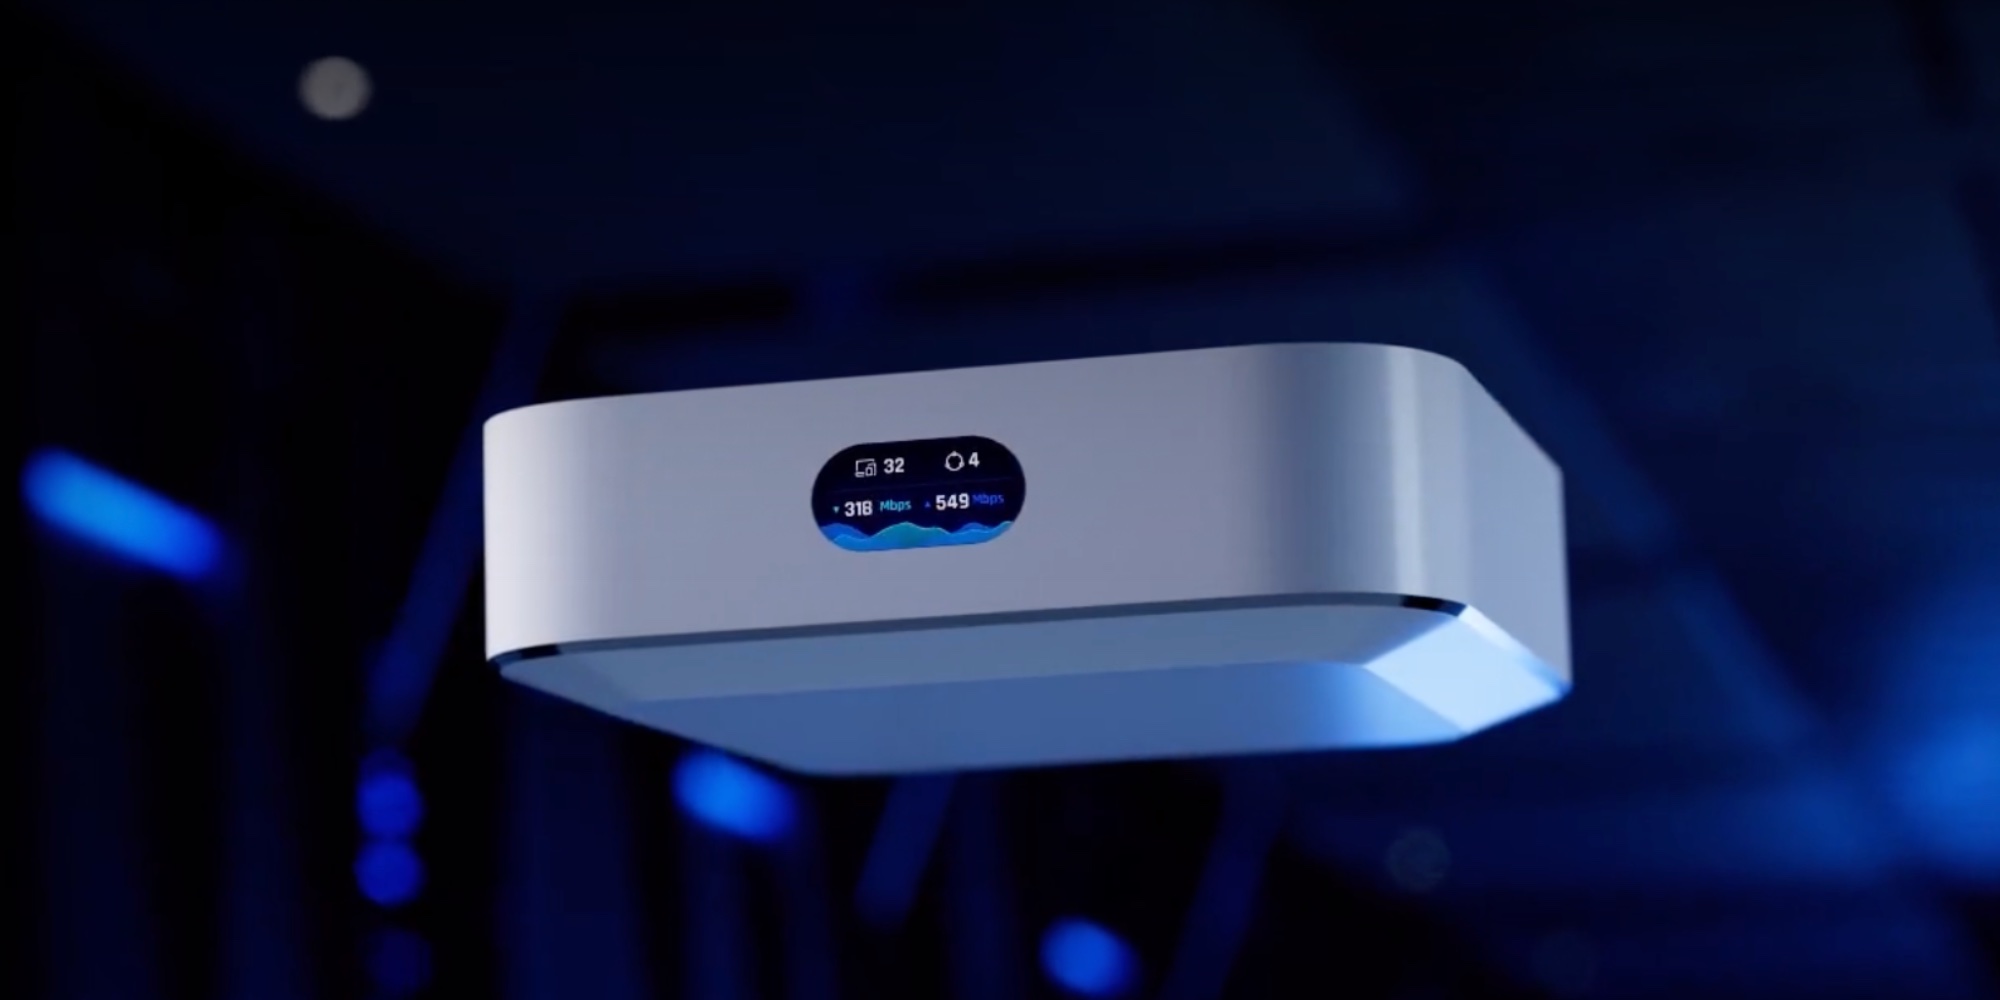 UniFi Express debuts as a new all-in-one package from Ubiquiti